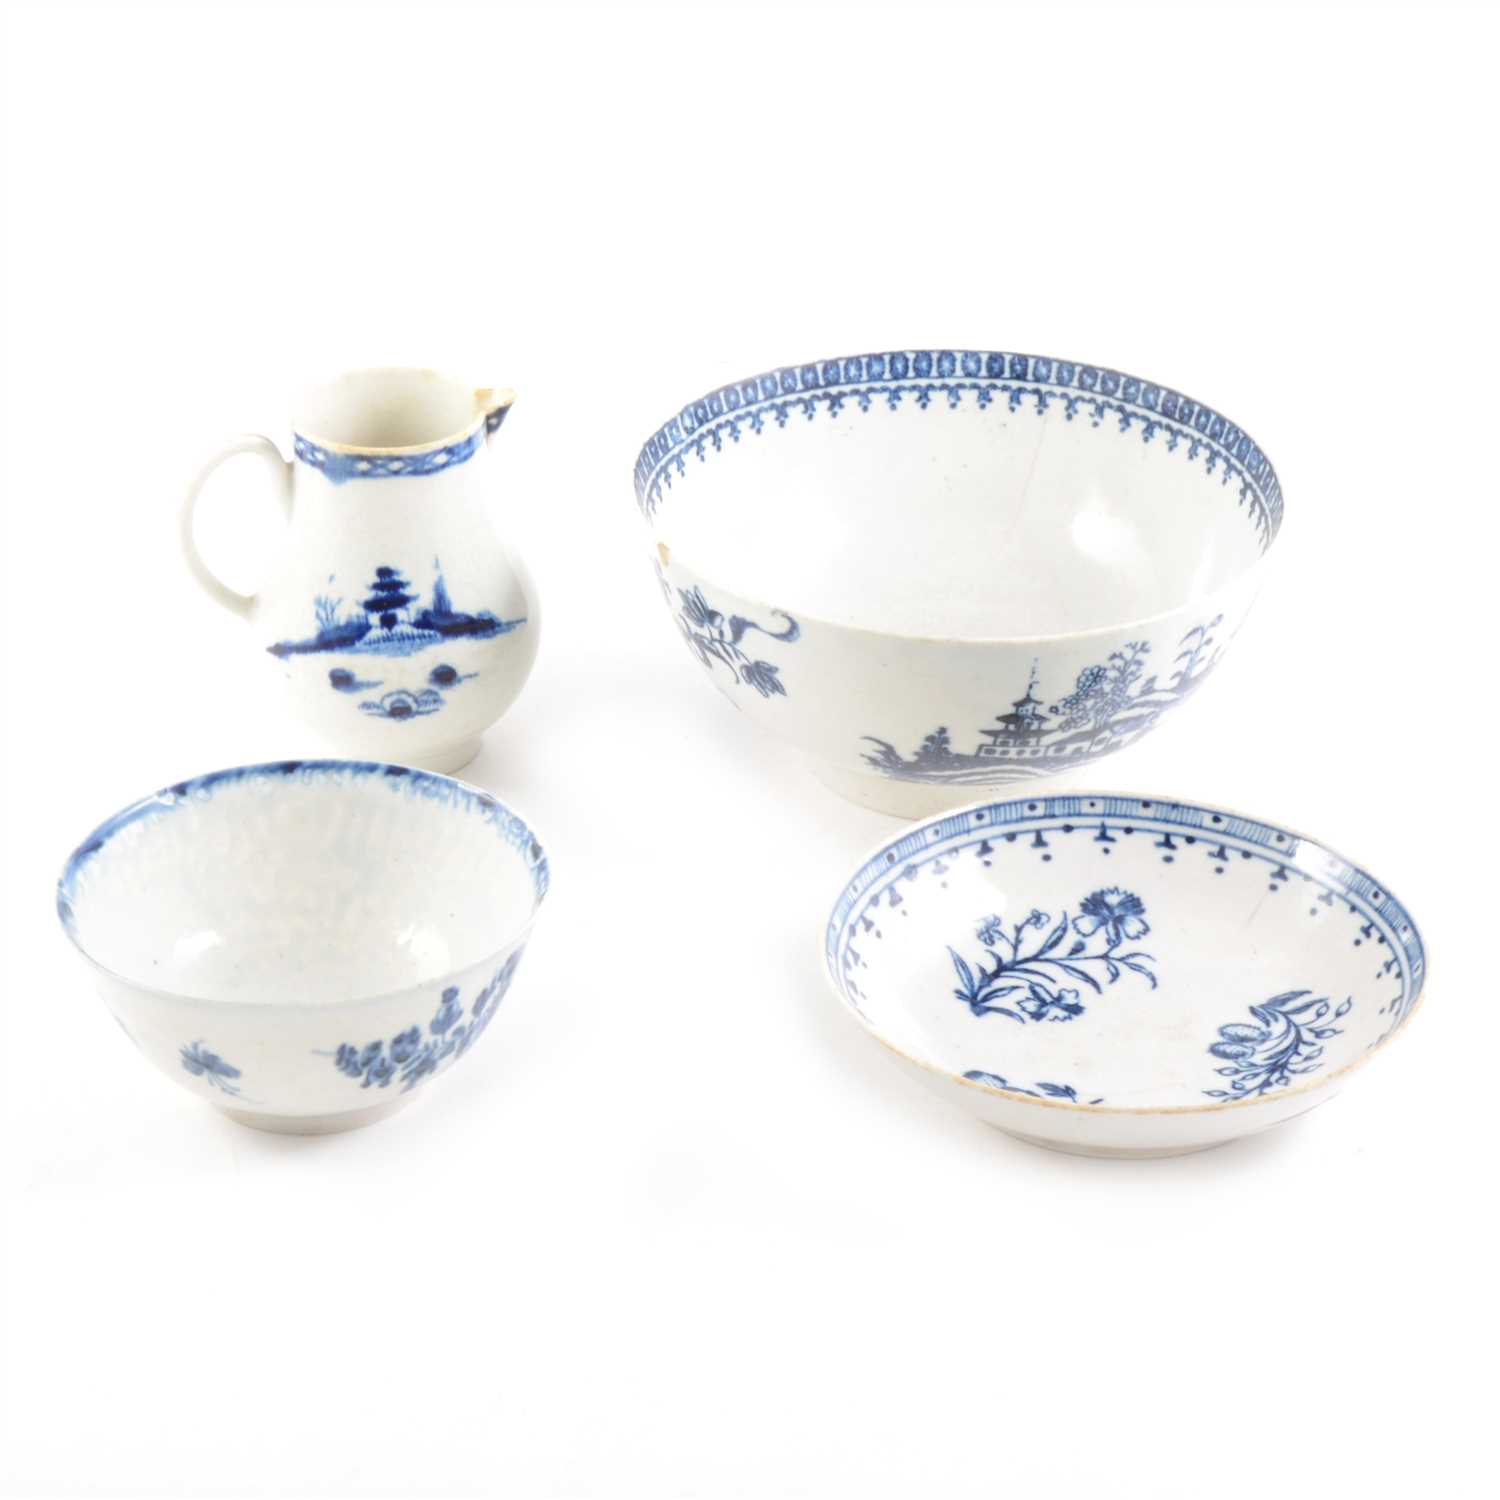 Lot 47 - Worcester jug, 18th Century, blue and white, a similar saucer and two bowls, all damaged